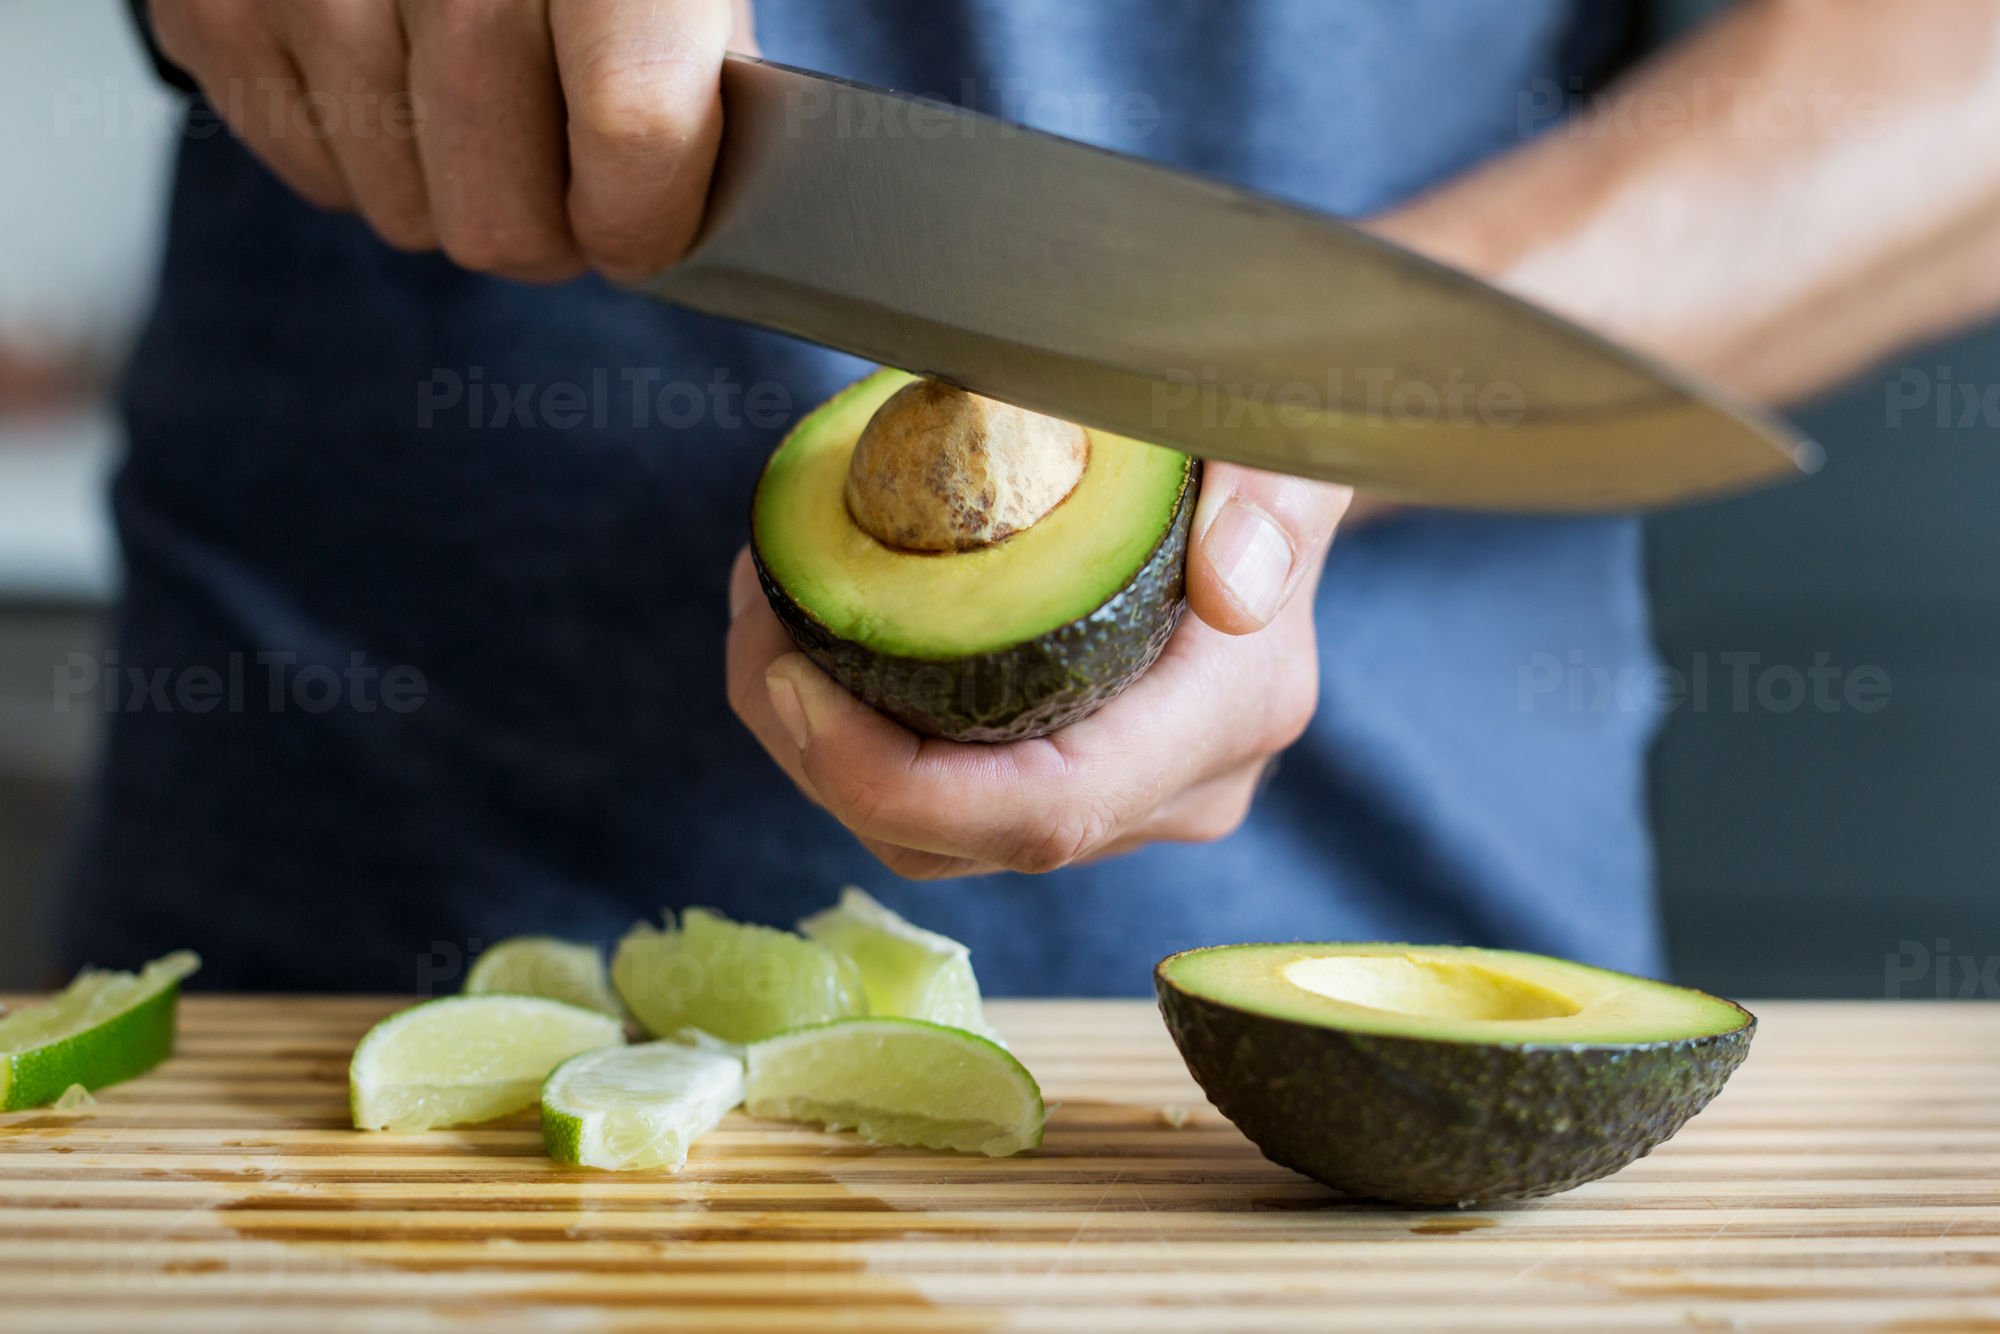 https://cdn.pixeltote.com/marketing/assets/previews/5/8/589e8e0f-6e47-4abc-815f-1a58d0f2bb3a/pv-lg-man-removing-a-pit-from-an-avocado-with-a-knife-default-stock-photo.jpg